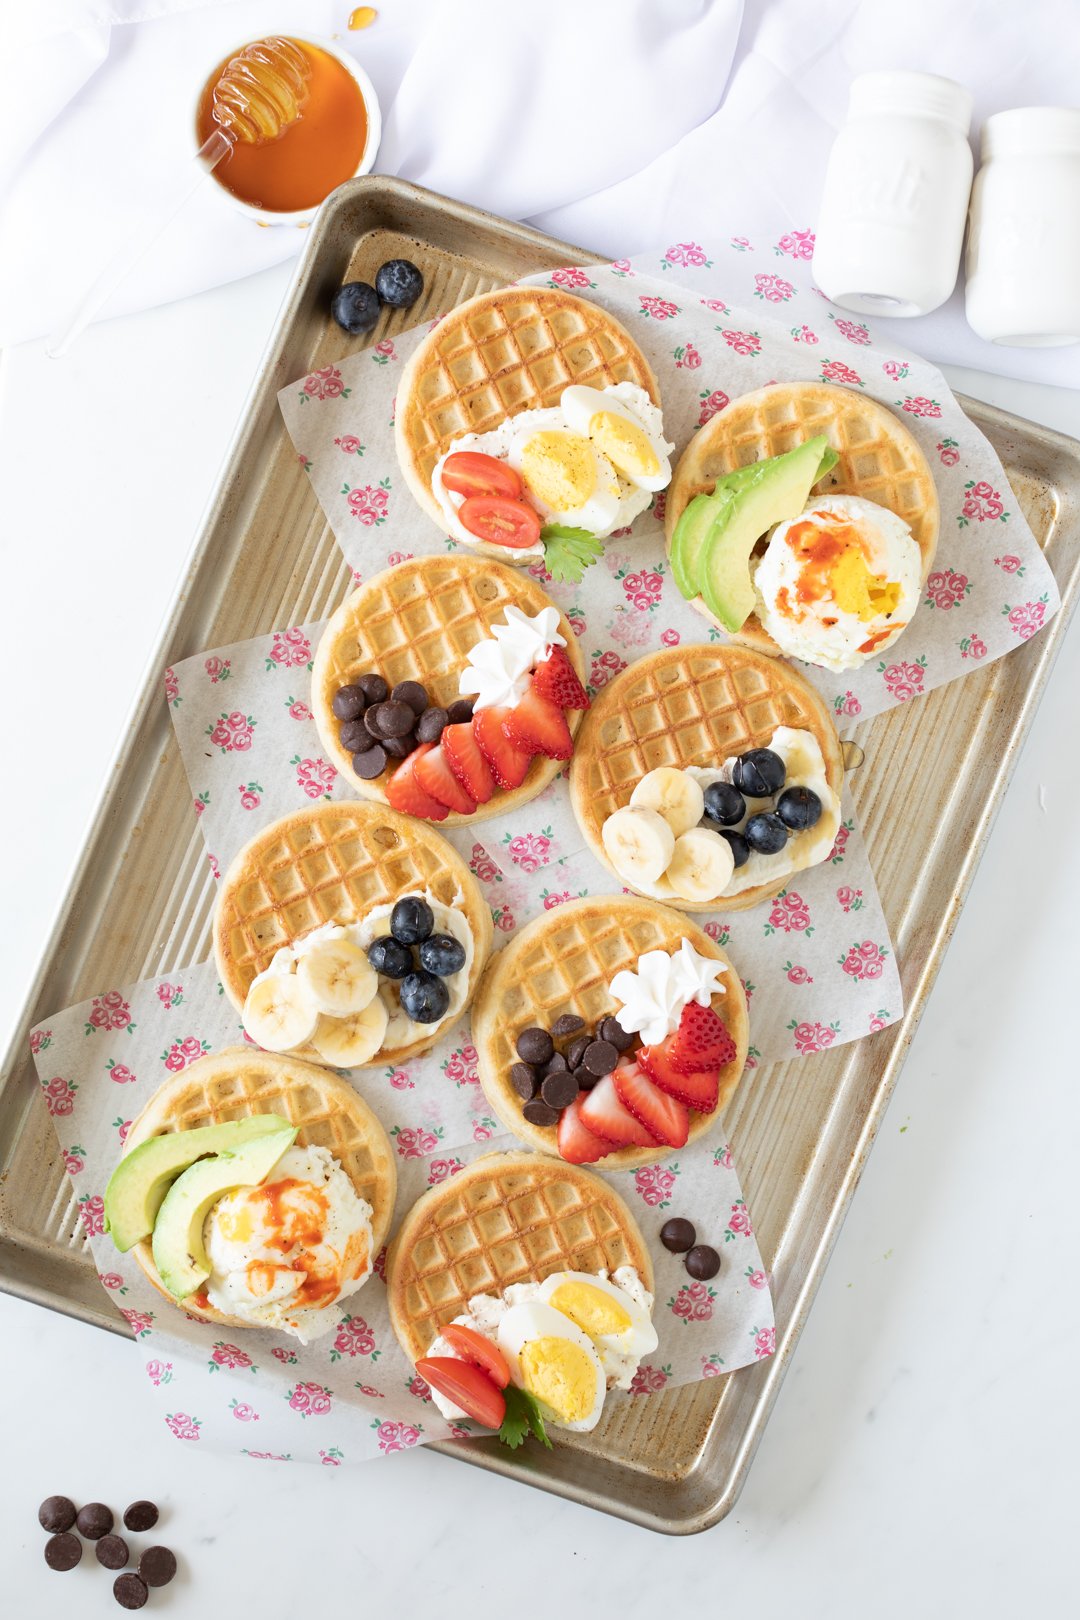 tray of sweet and savory waffles with fresh fruit, poached eggs, veggies, ricotta